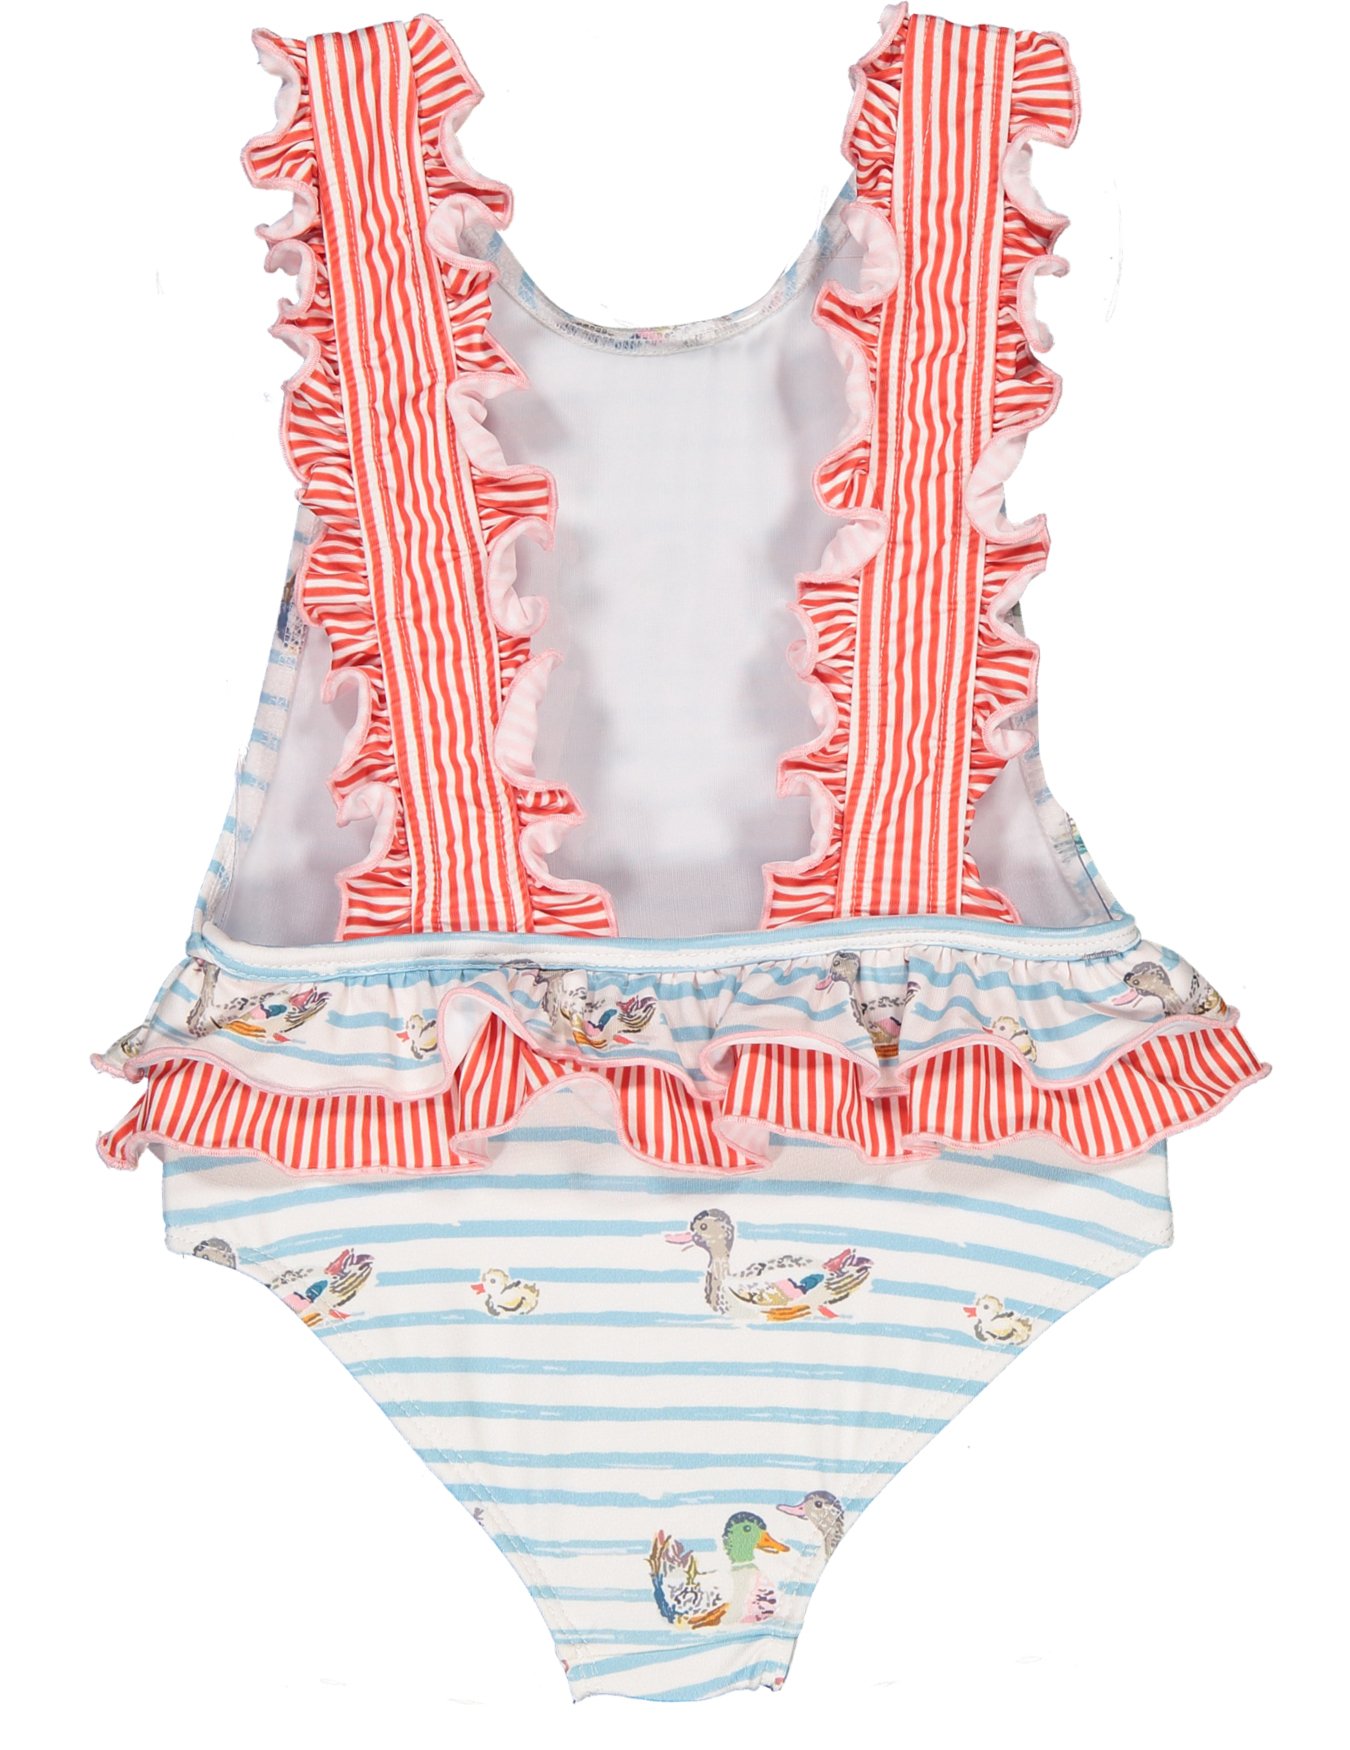 Duck family swimsuit — Paper Boat